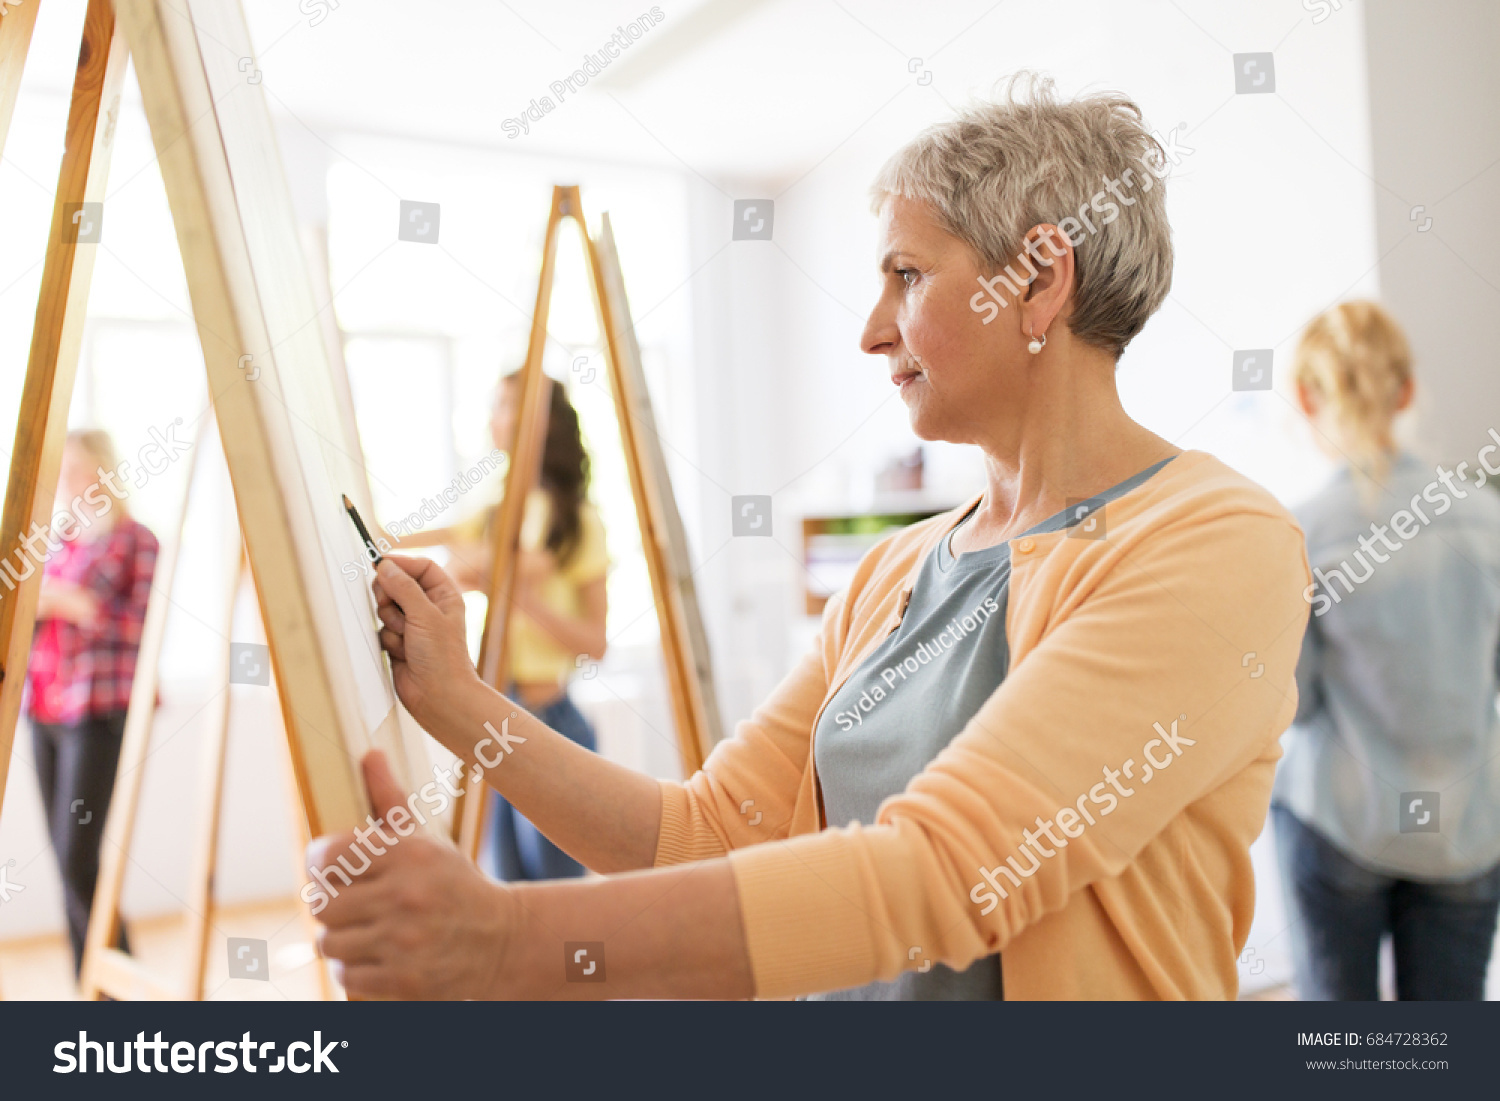 art school, creativity and people concept - happy senior woman artist with easel and pencil drawing picture at studio #684728362